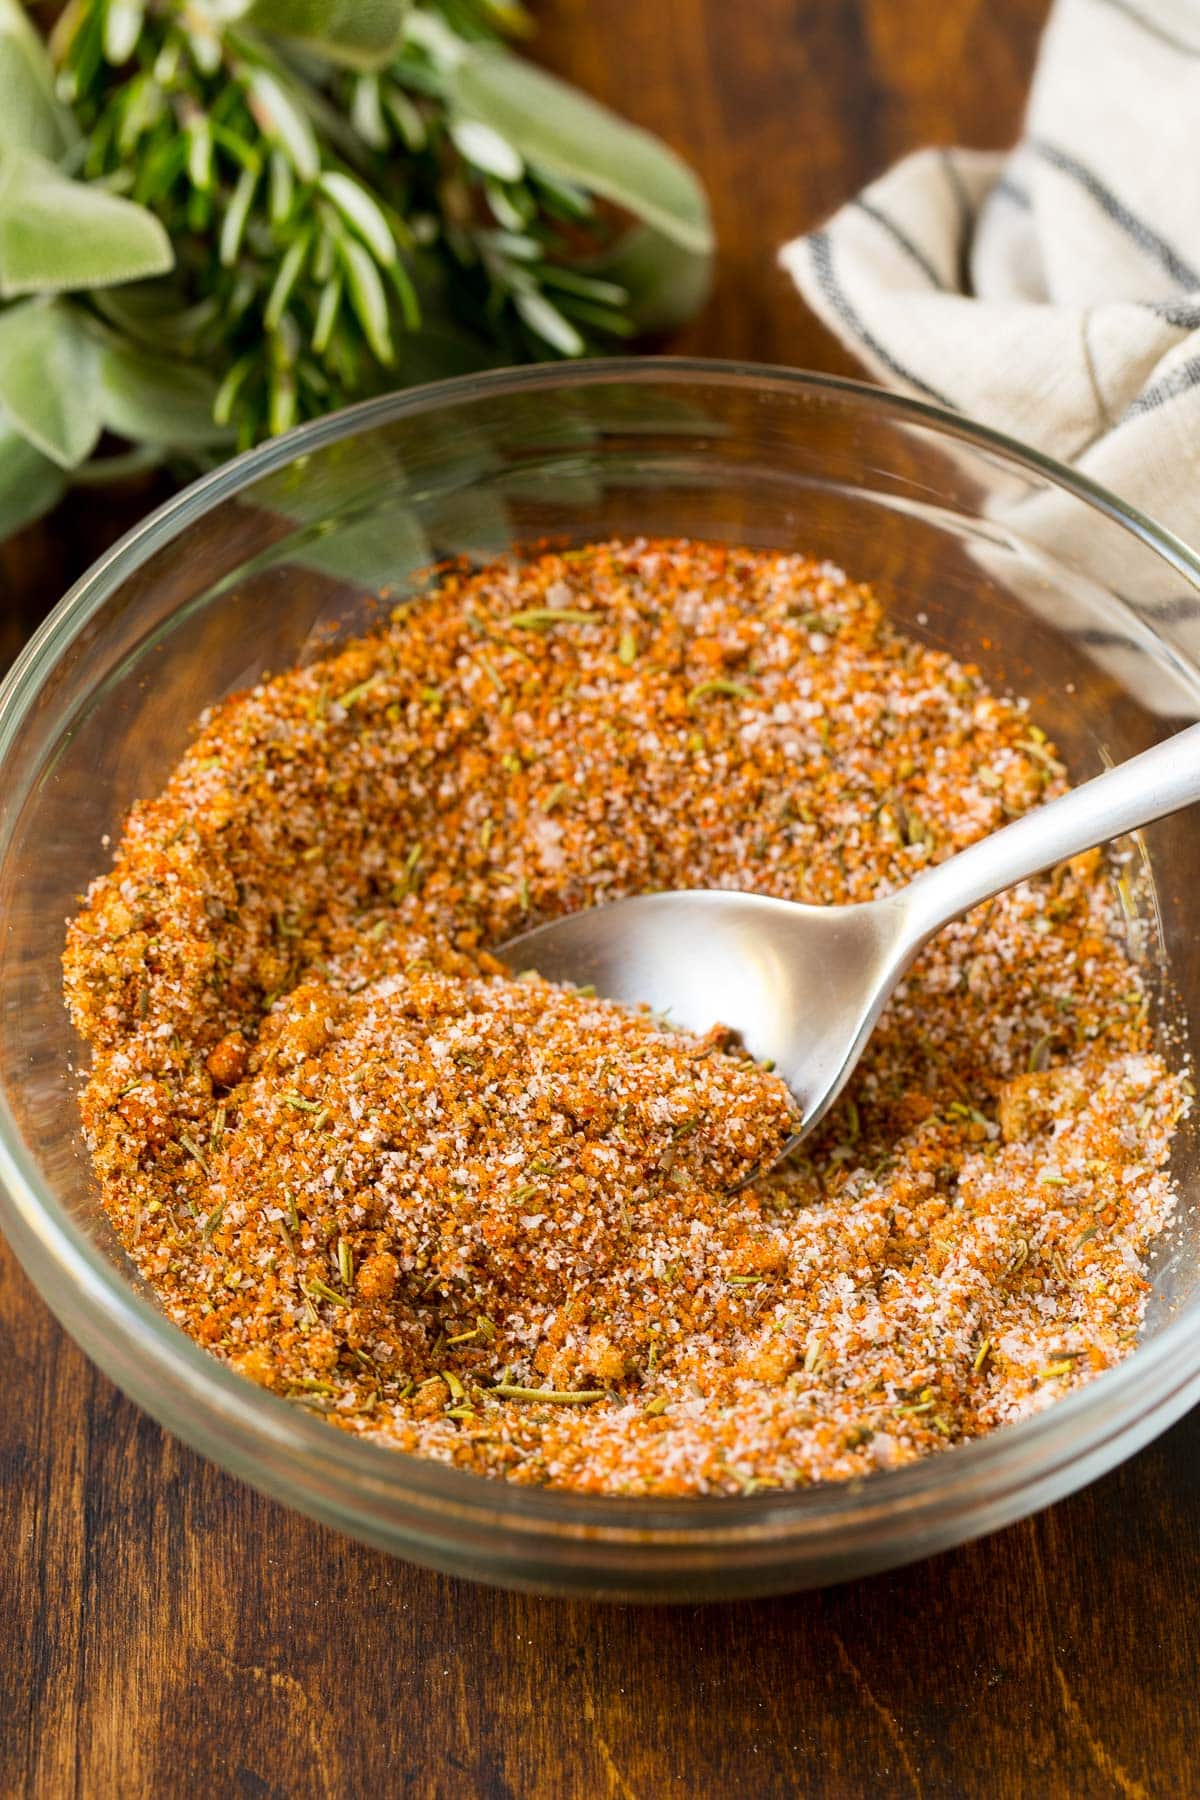 A bowl of spice mix with a spoon in it.